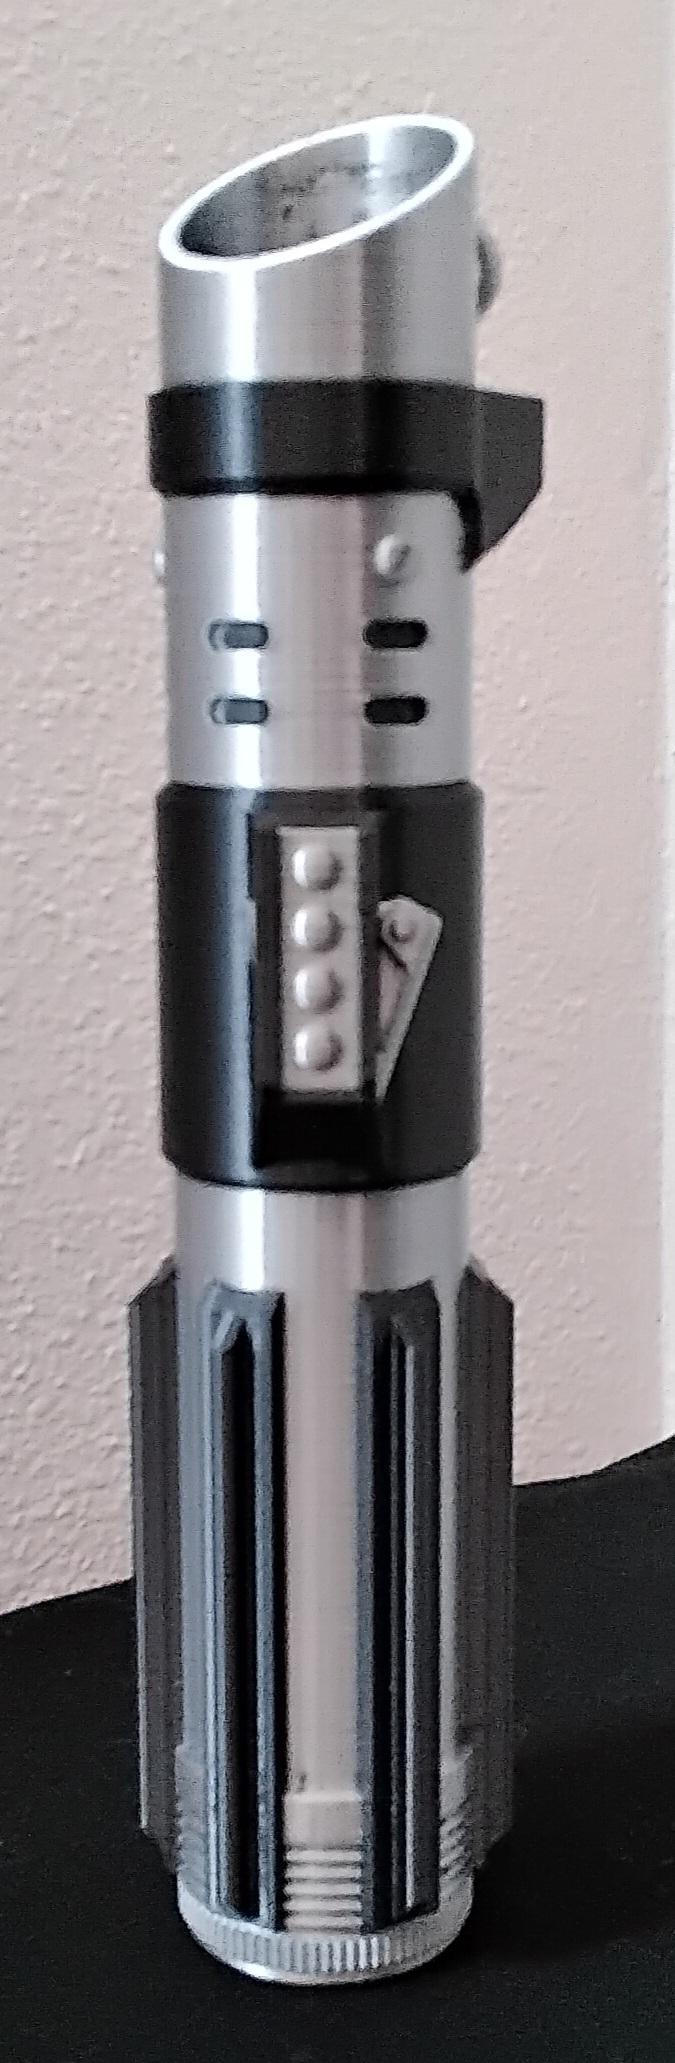 Collapsing Sith Lightsaber (dual extrusion) - printed on my raise3d pro 2 plus using the dual extrusion. Was my first attempt with the printer and slicer. not too bad. - 3d model